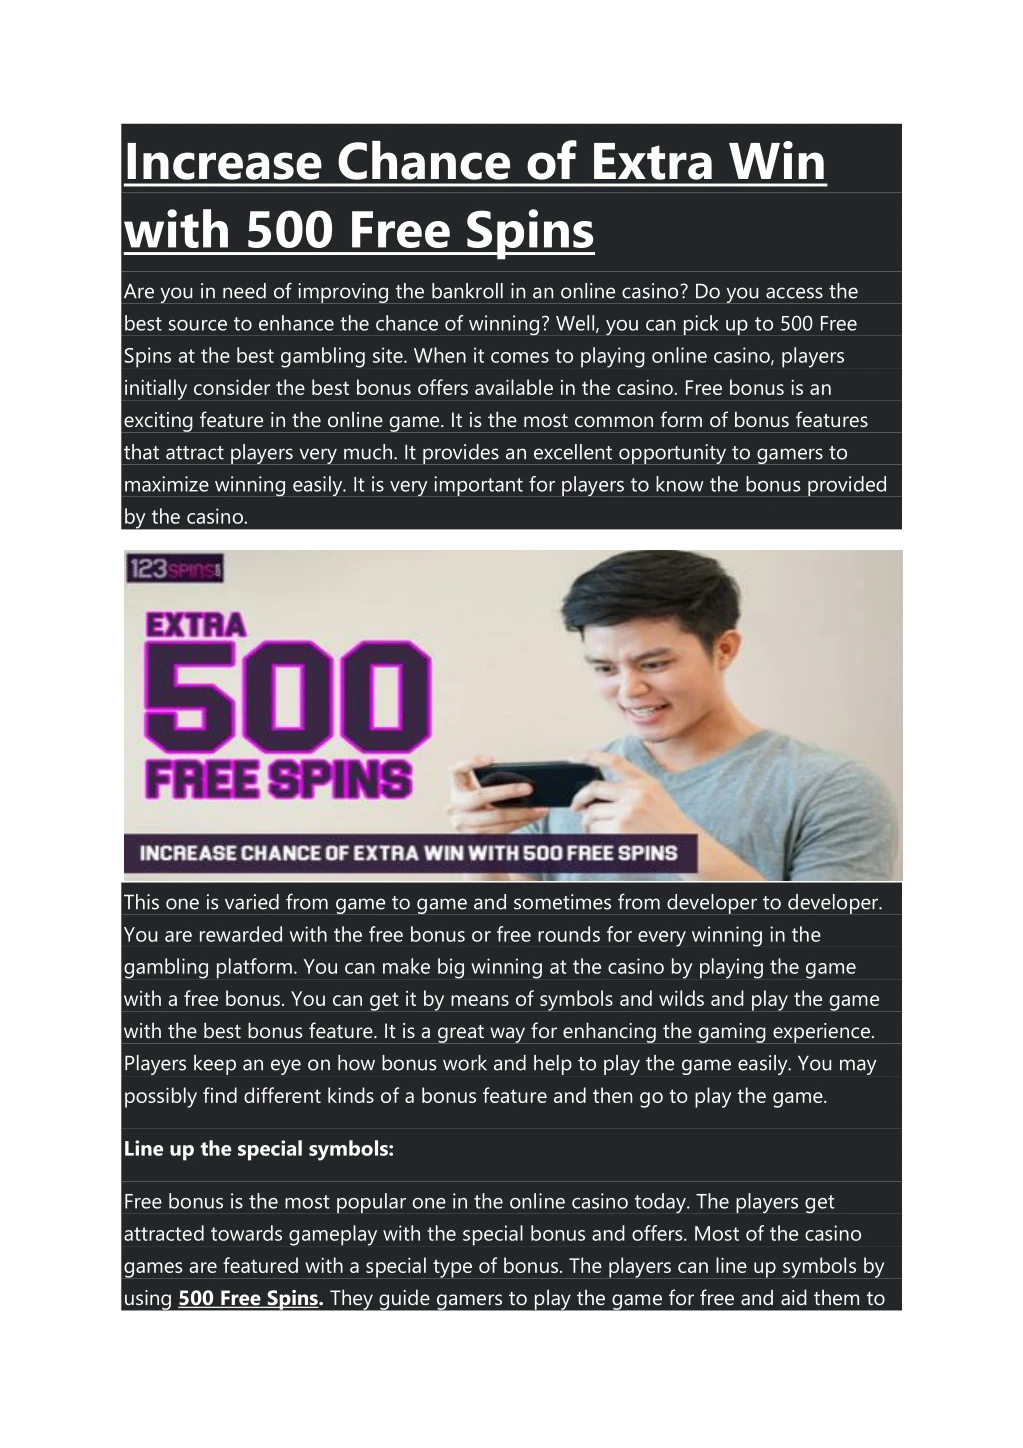 increase chance of extra win with 500 free spins n.